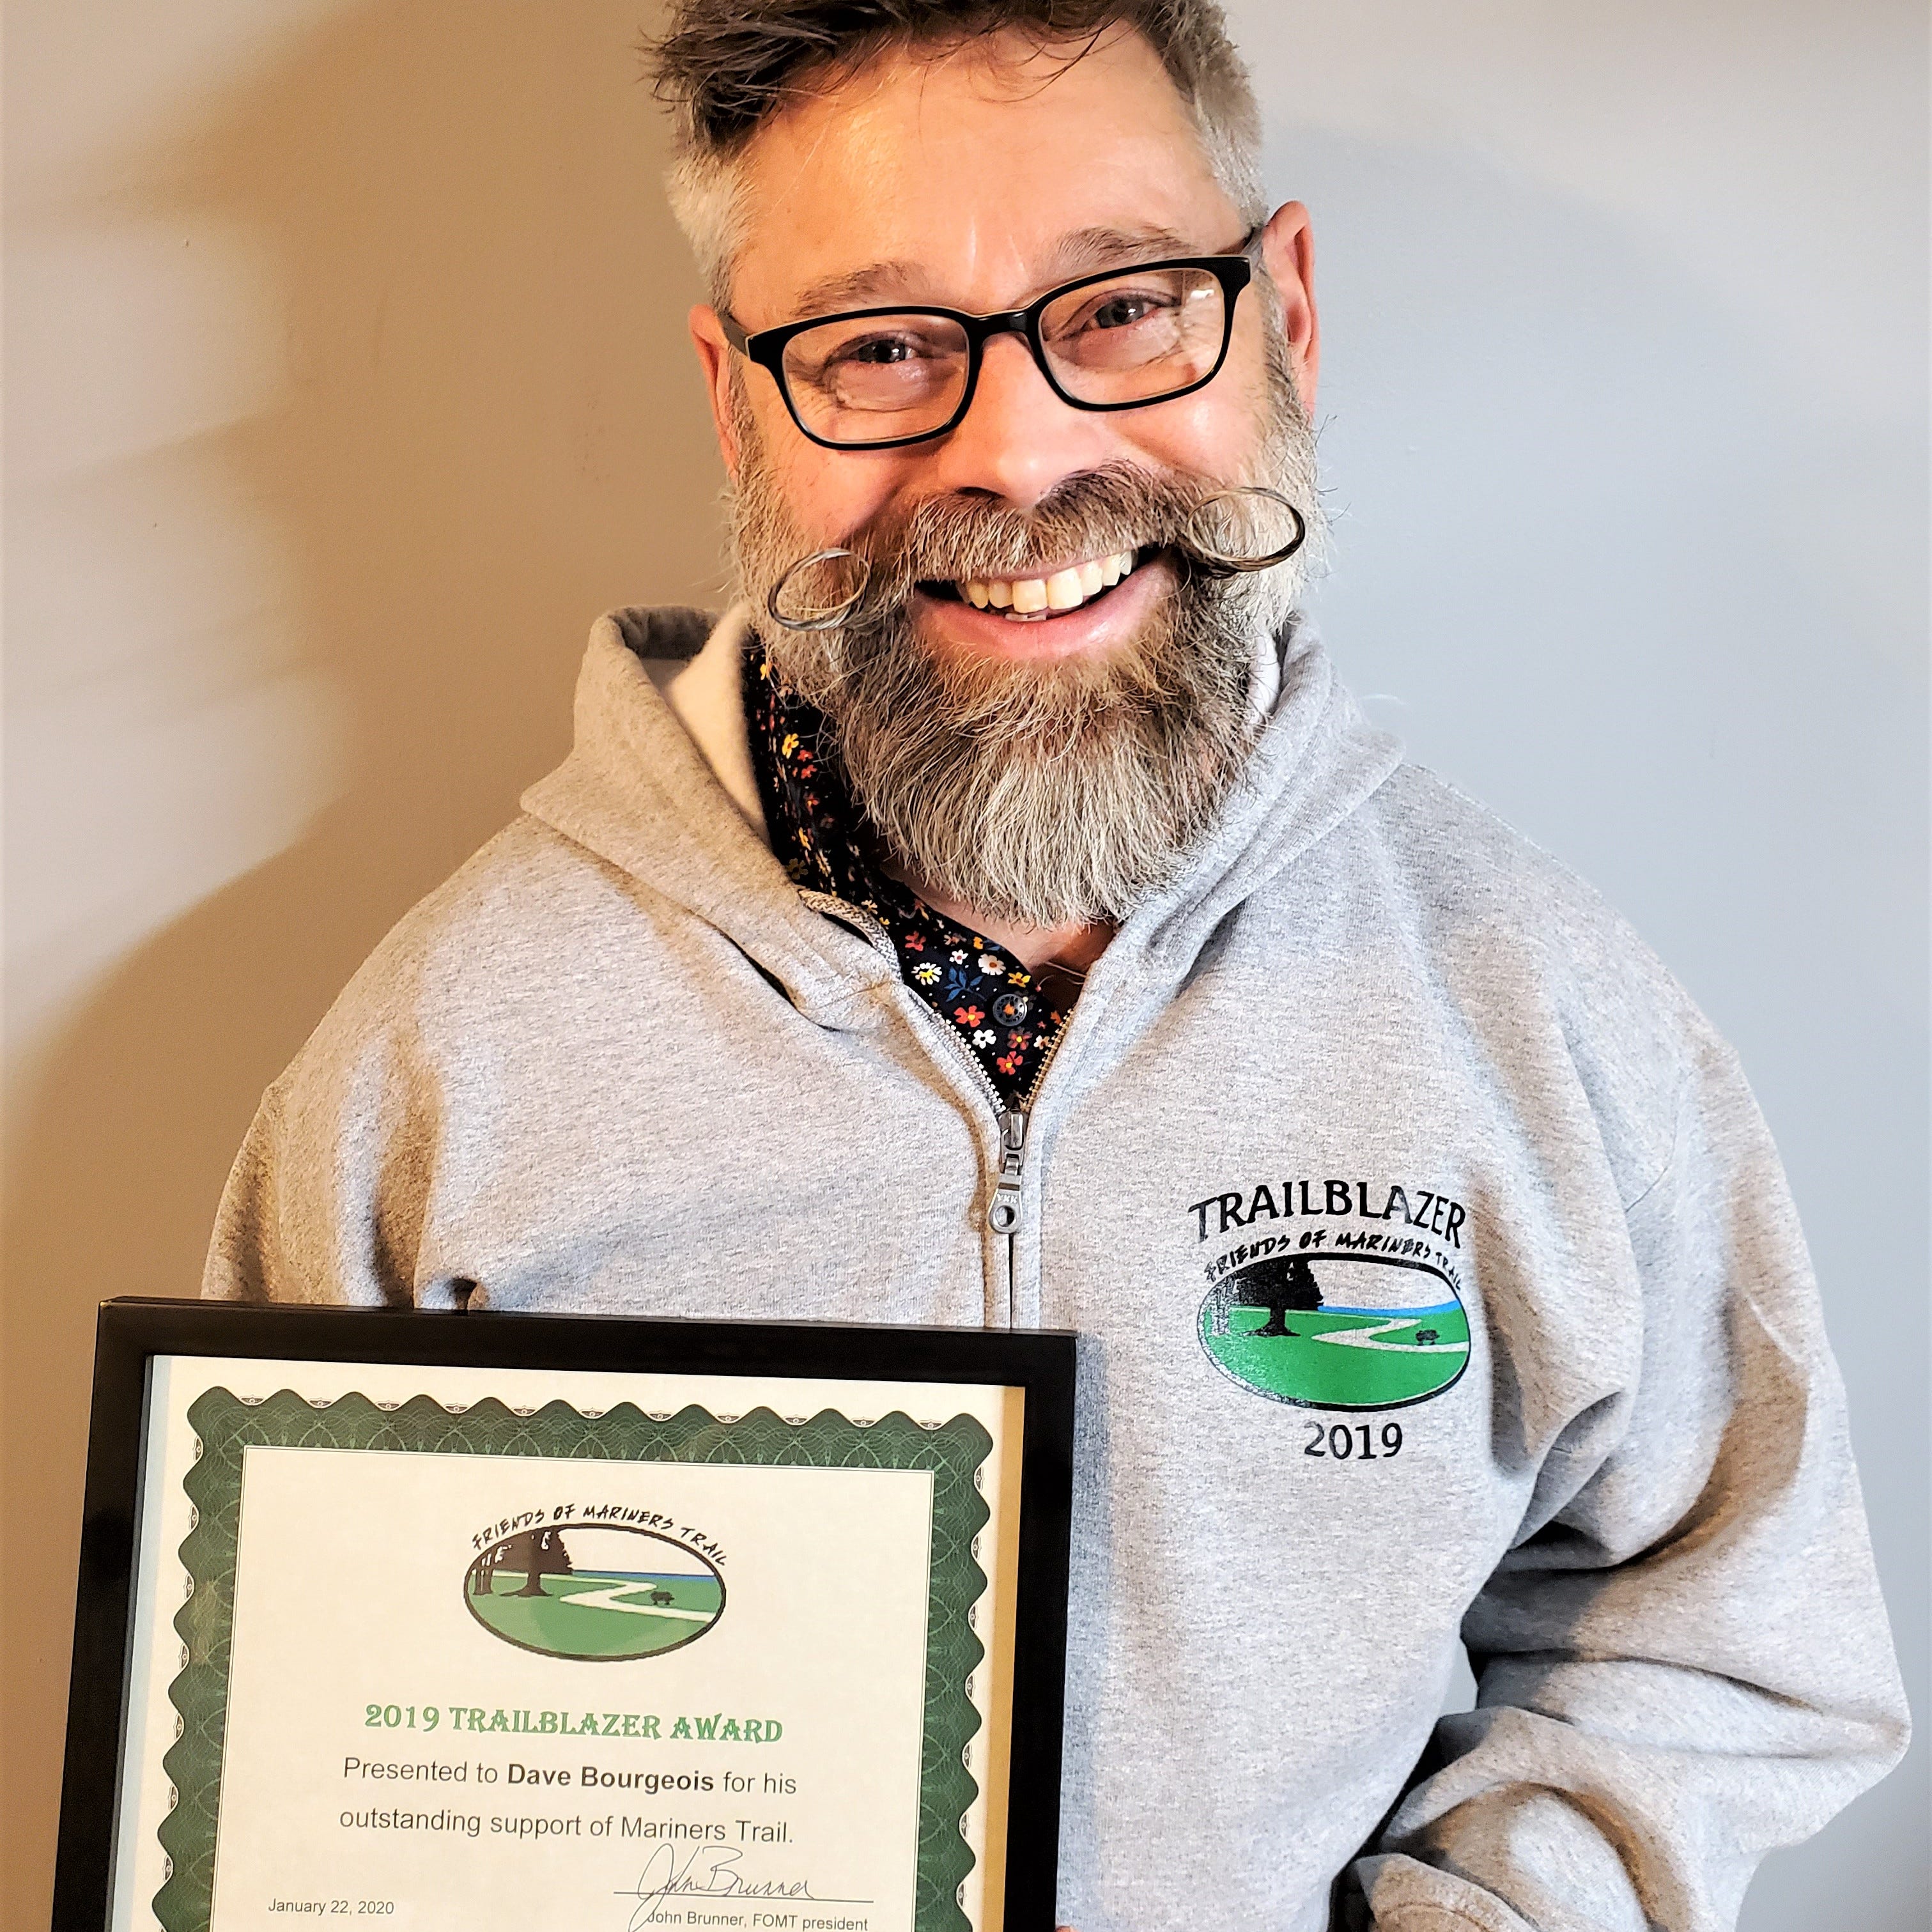 Dave Bourgeois wearing his Trail Blazer shirt and holding the certificate honoring him as the Friends of Mariners Trail's 13th annual Trail Blazer winner.